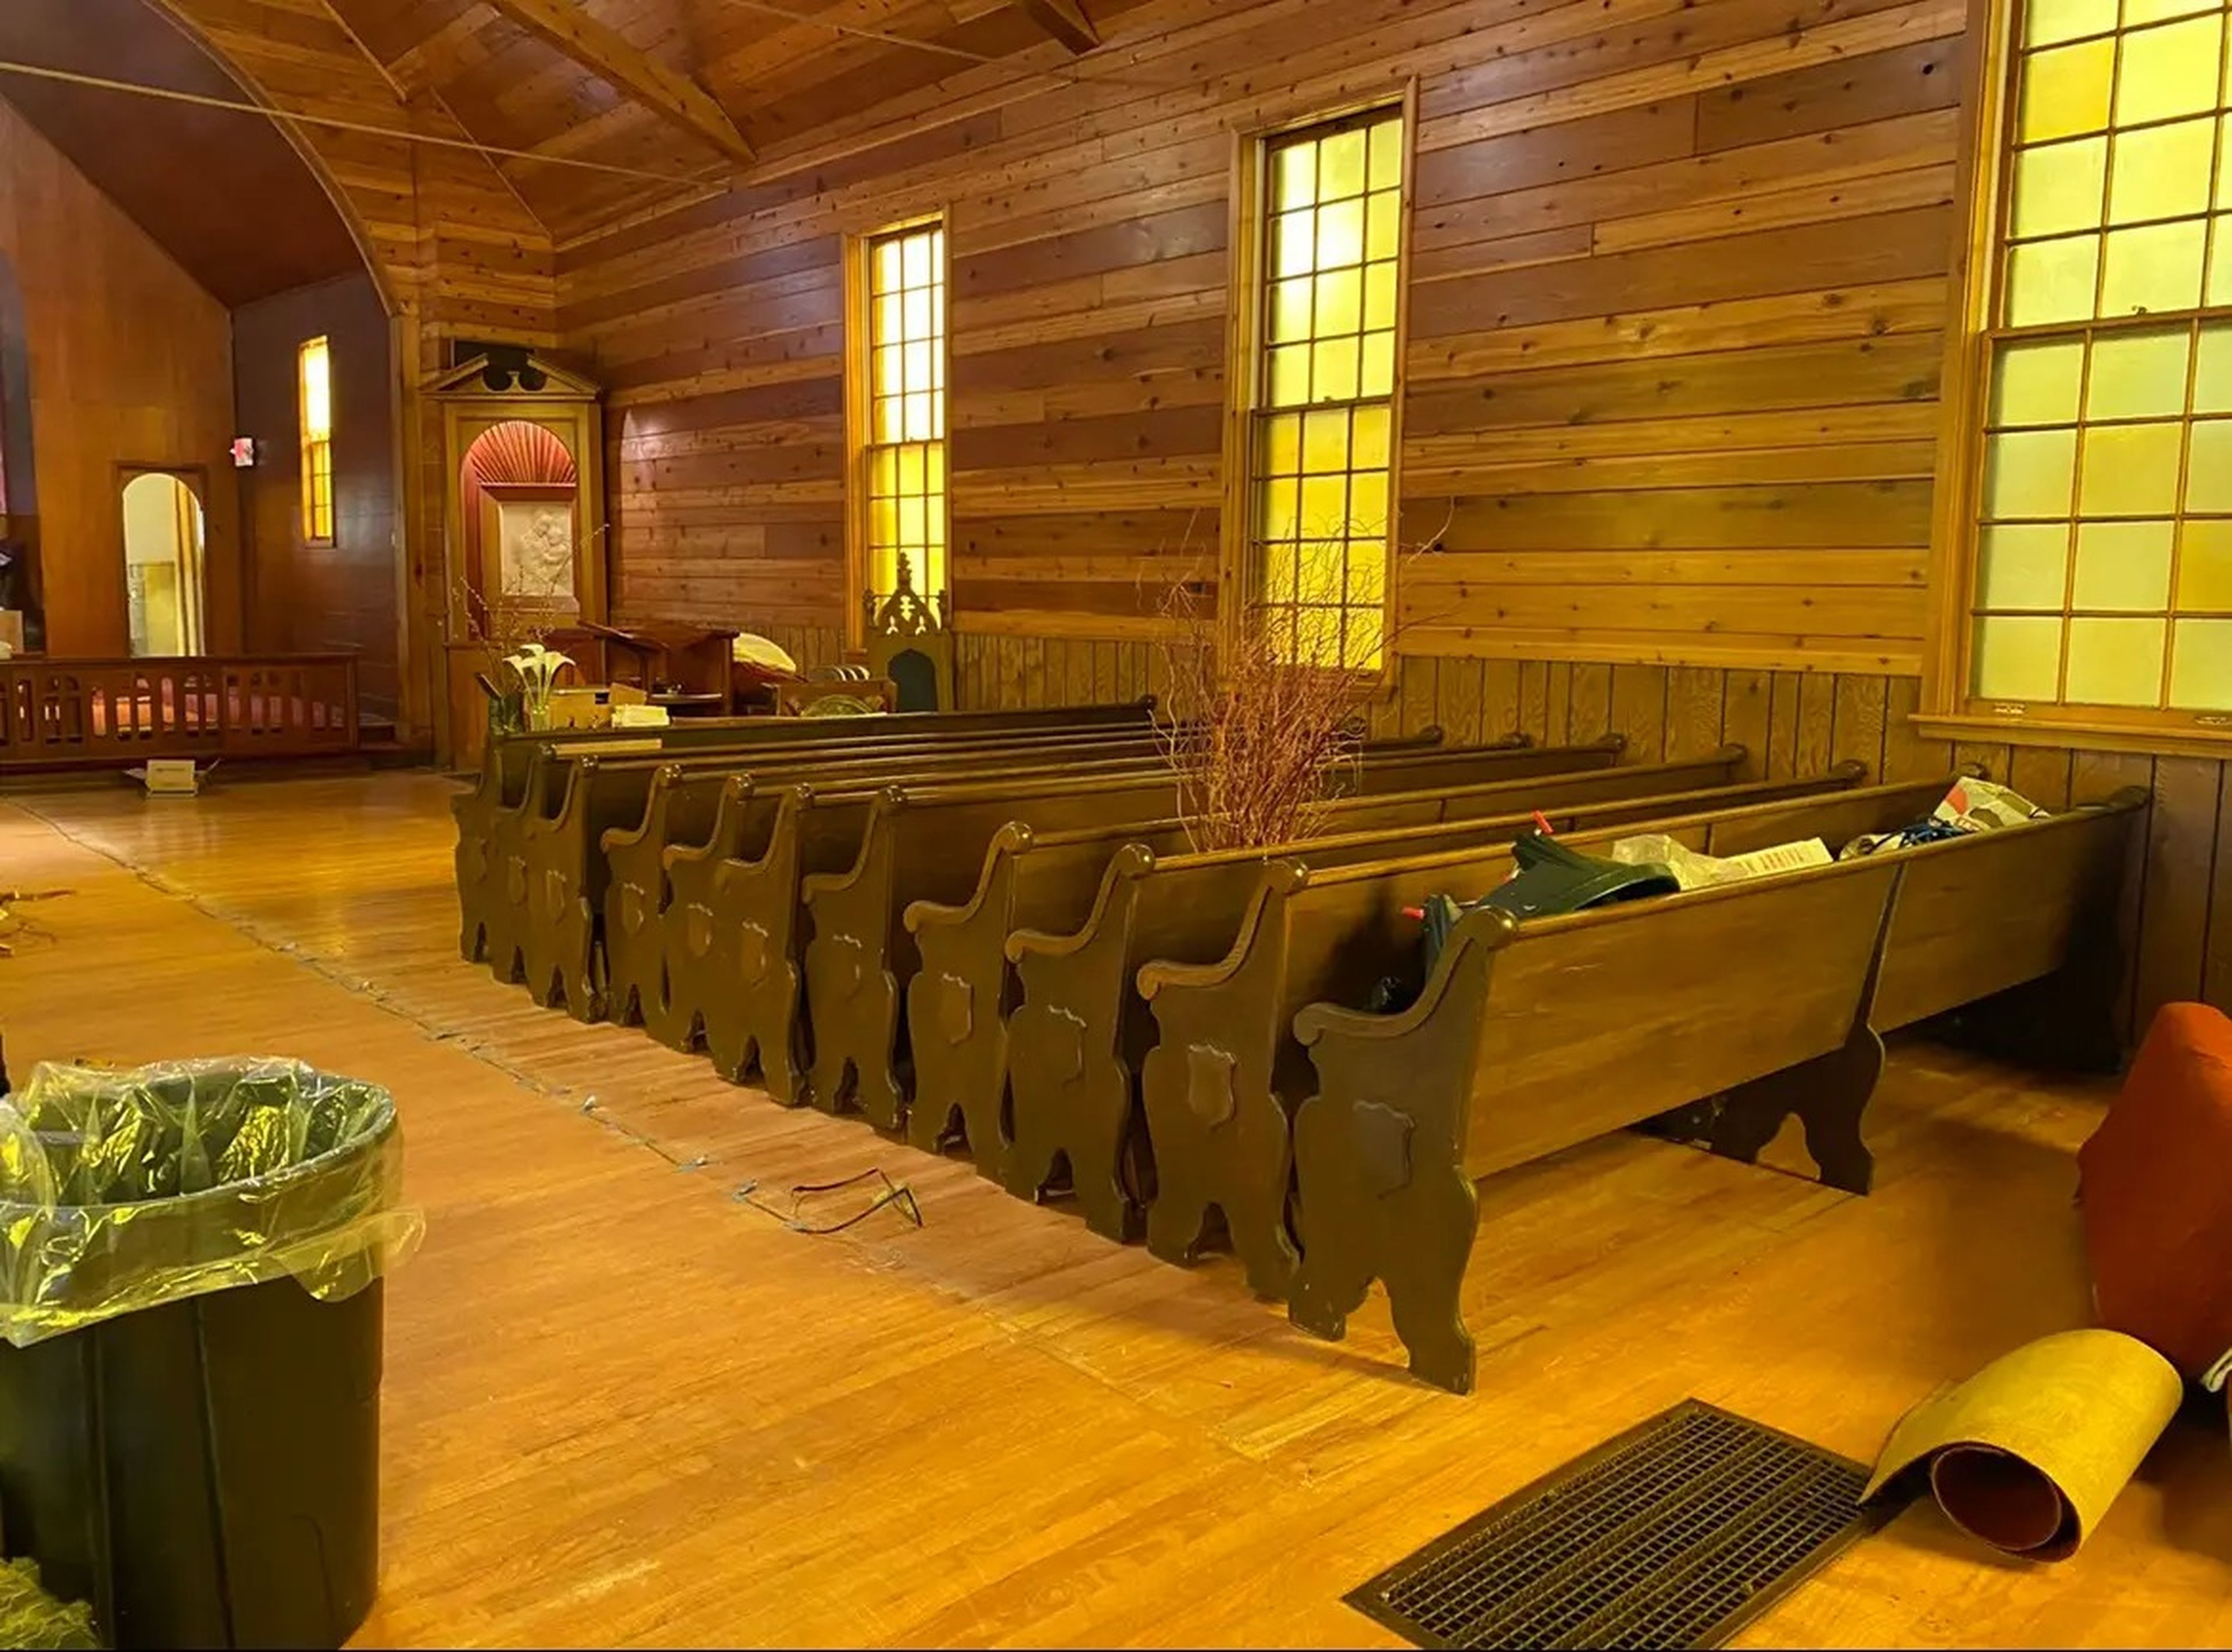 A church nave with wood-clad walls and wood pews.